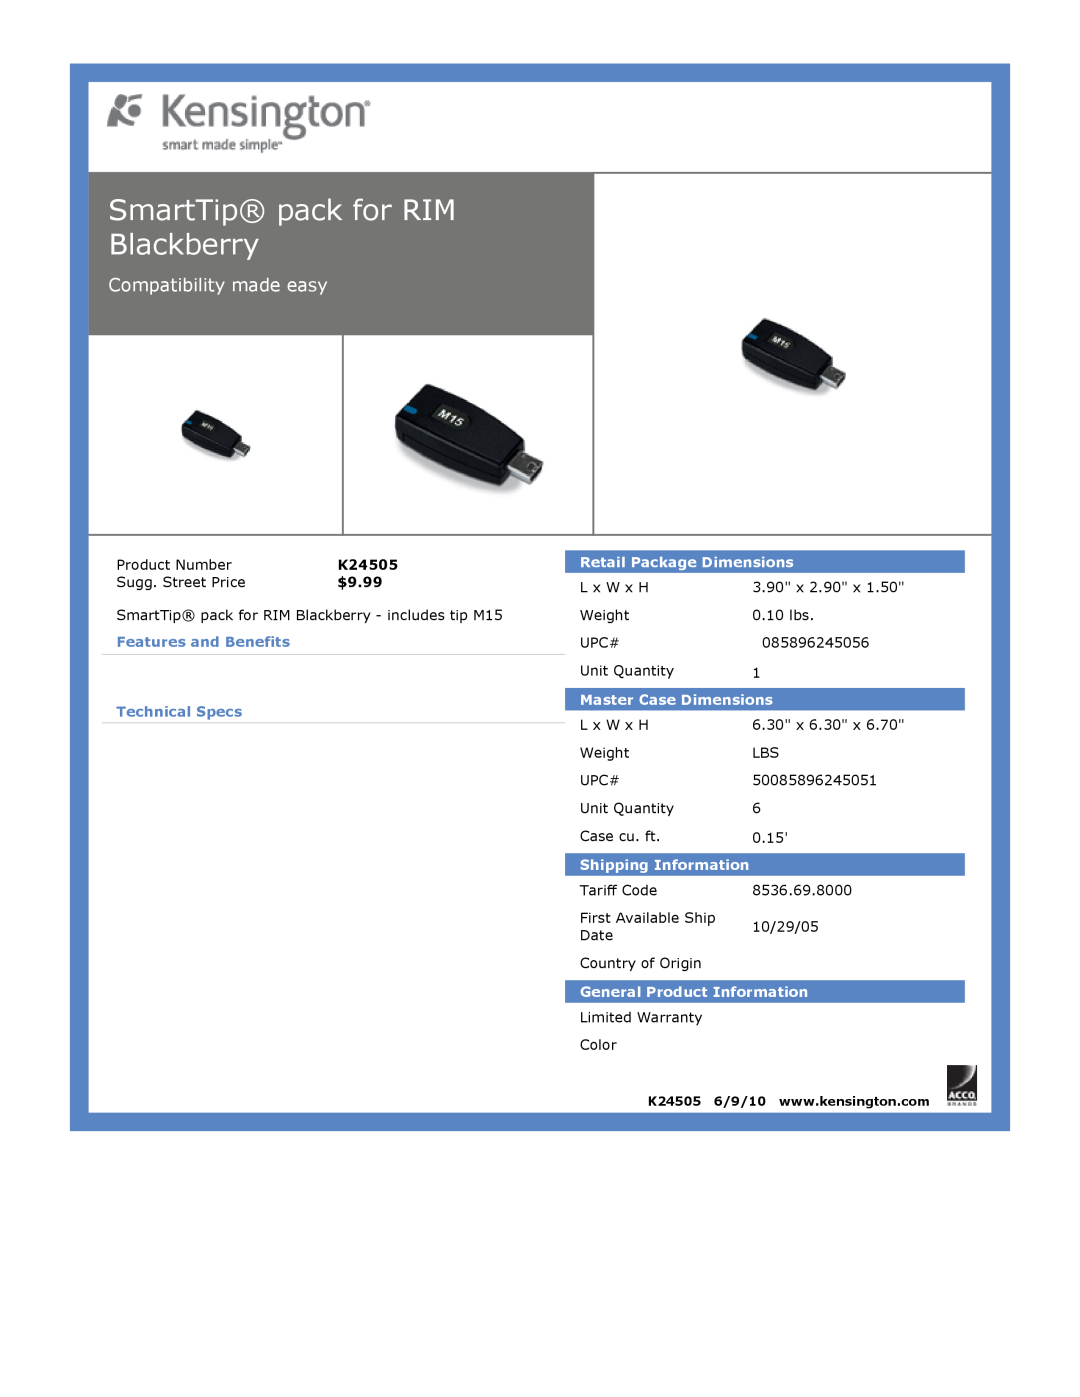 Kensington EU64325 SmartTip pack for RIM Blackberry, Compatibility made easy, $9.99, Features and Benefits Technical Specs 